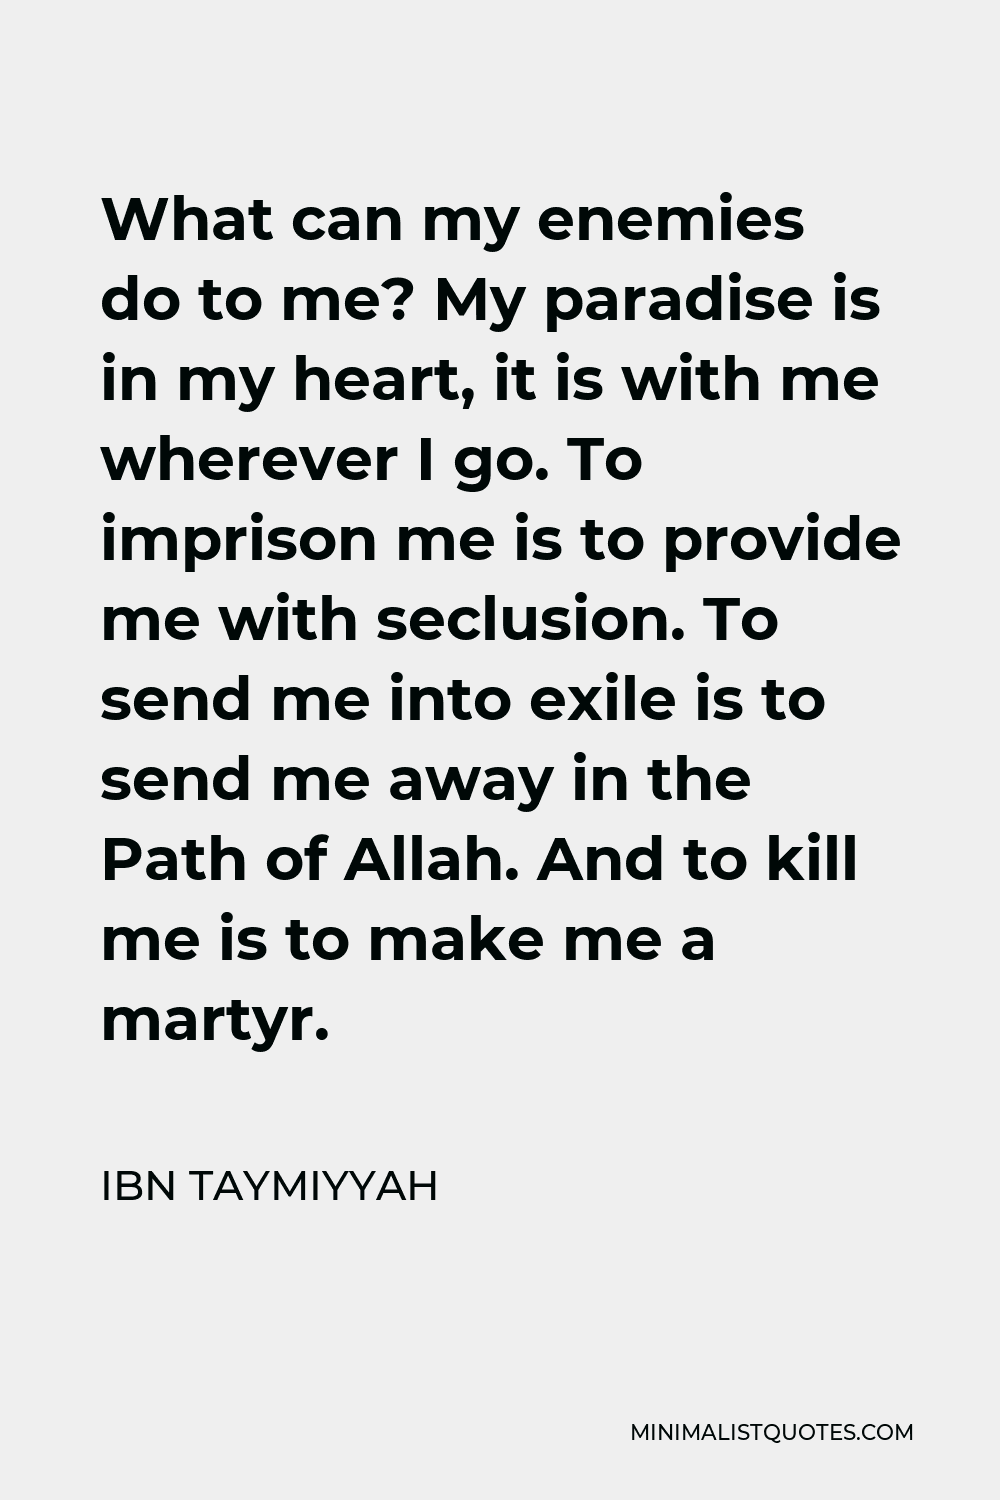 Ibn Taymiyyah Quote - What can my enemies do to me? My paradise is in my heart, it is with me wherever I go. To imprison me is to provide me with seclusion. To send me into exile is to send me away in the Path of Allah. And to kill me is to make me a martyr.